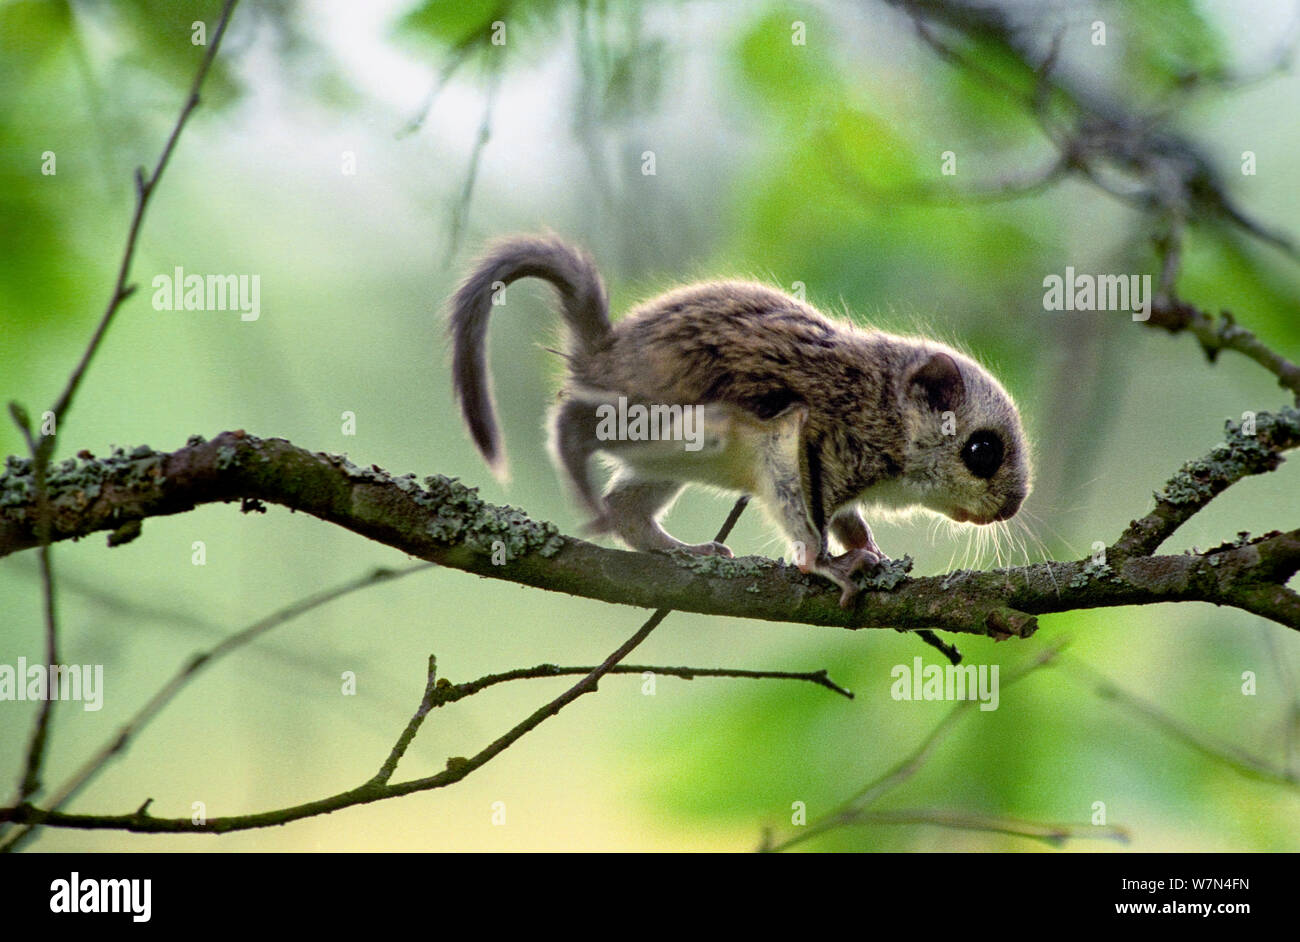 Siberian flying squirrel (Pteromys volans), one month baby, Seinajoki, Finland, August Stock Photo